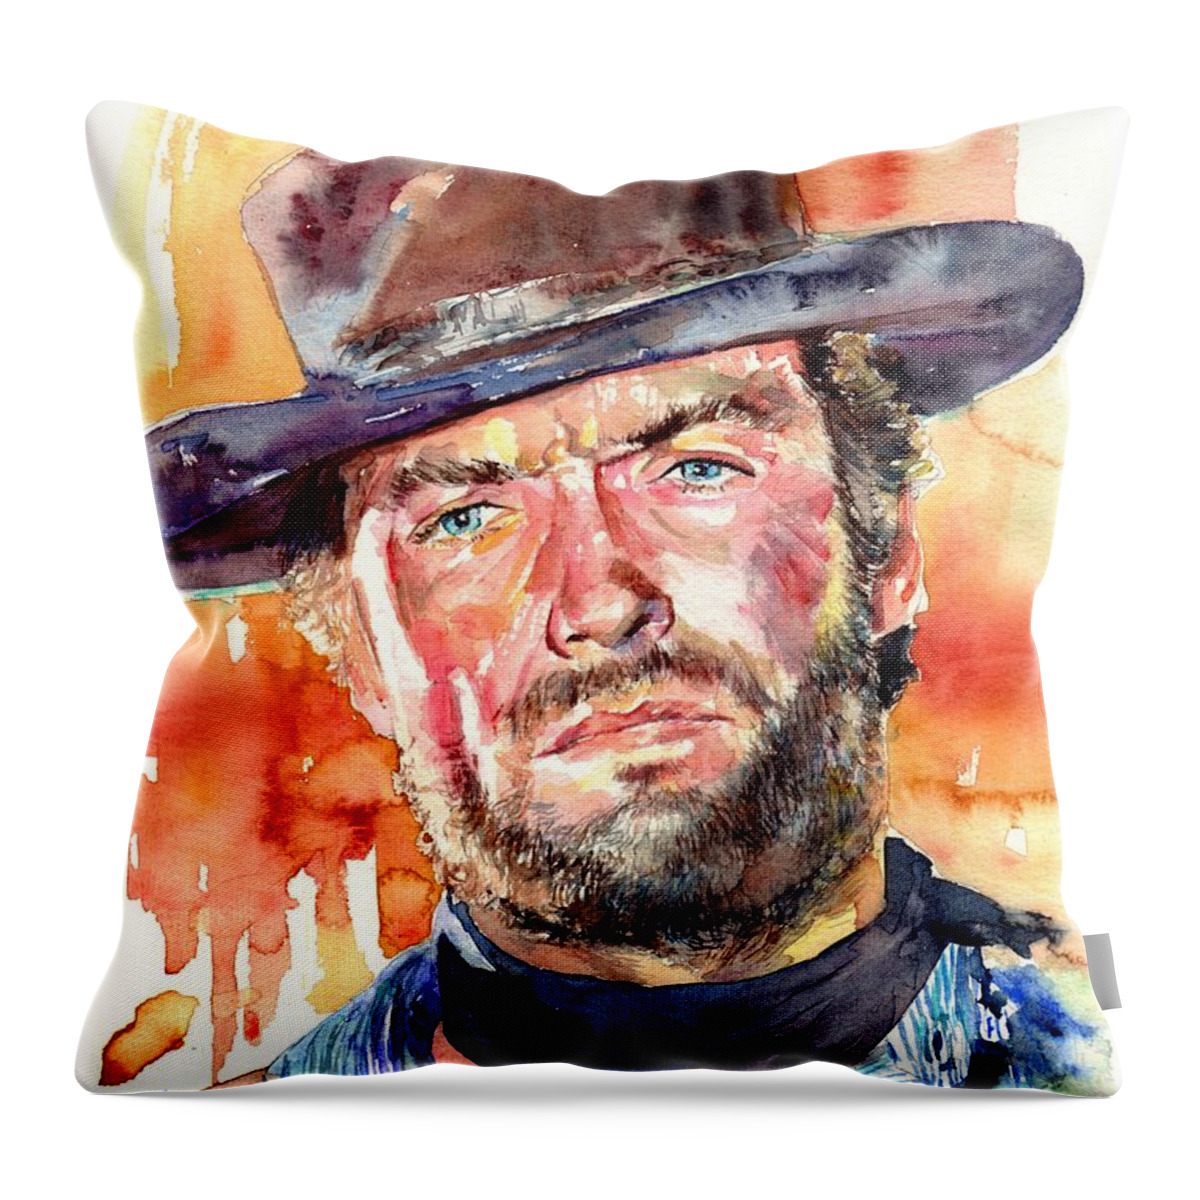 Clint Throw Pillow featuring the painting Clint Eastwood Watercolor by Suzann Sines